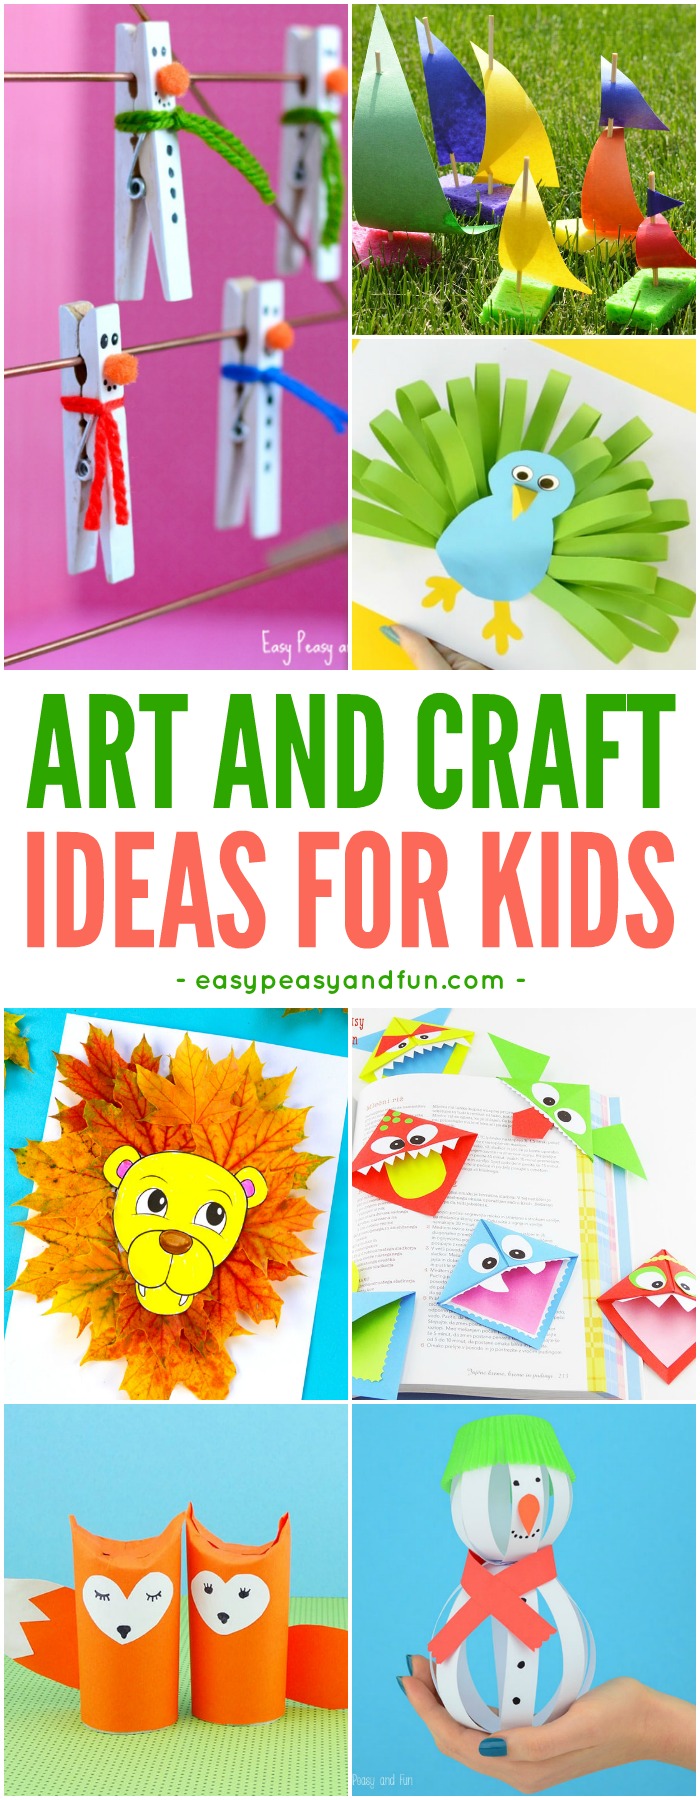 Tons of Art and Craft Ideas for Kids to Make